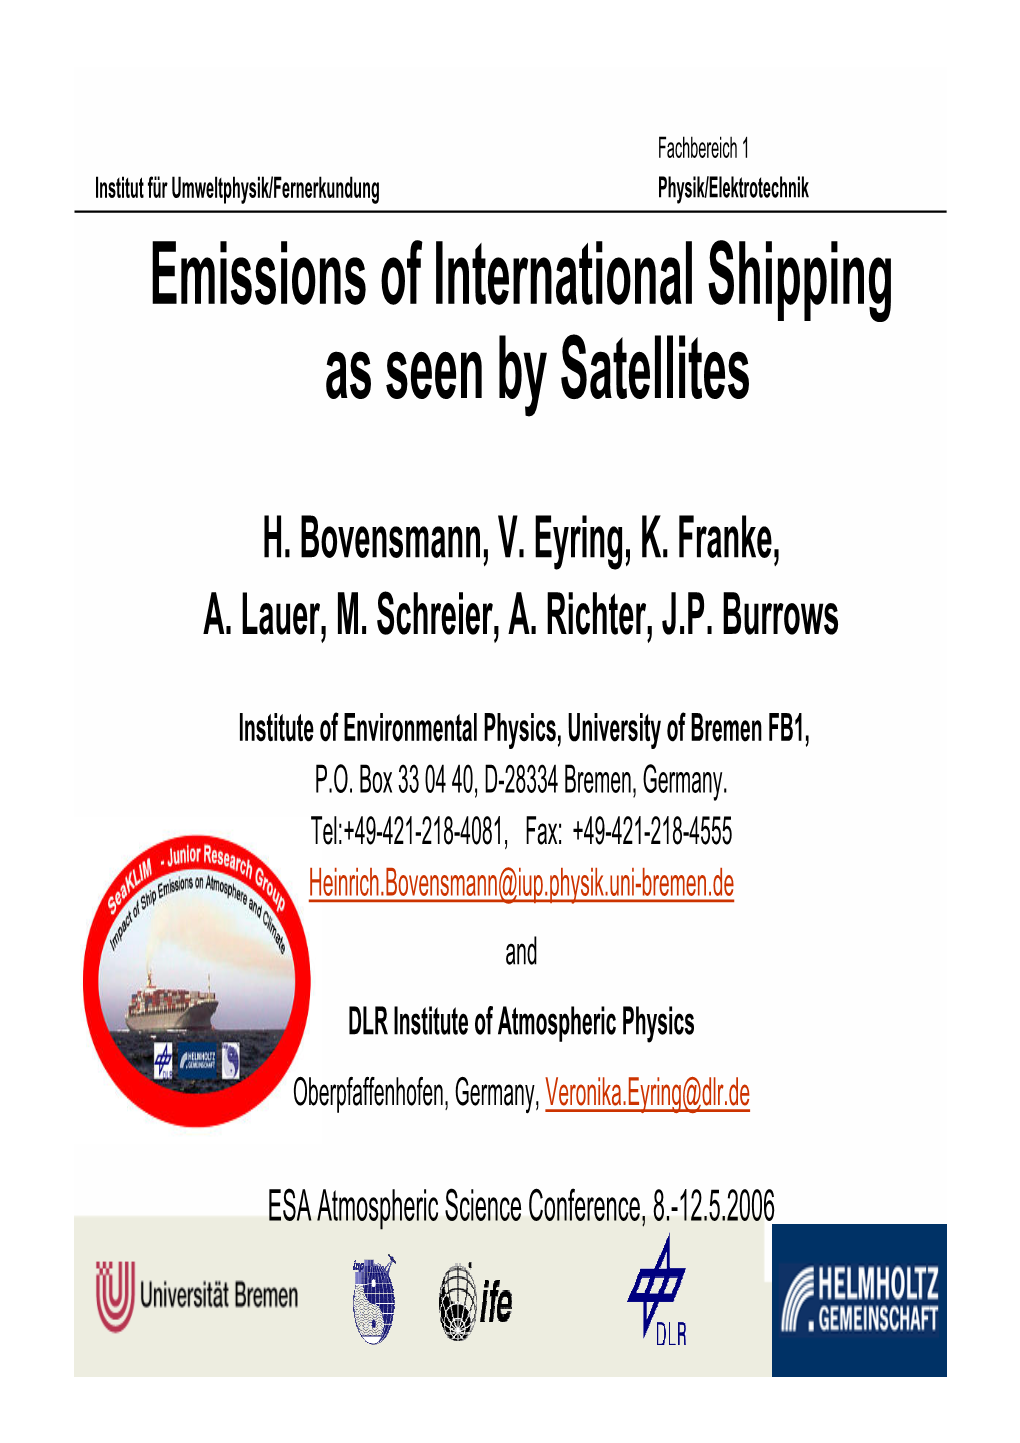 Emissions of International Shipping As Seen by Satellites